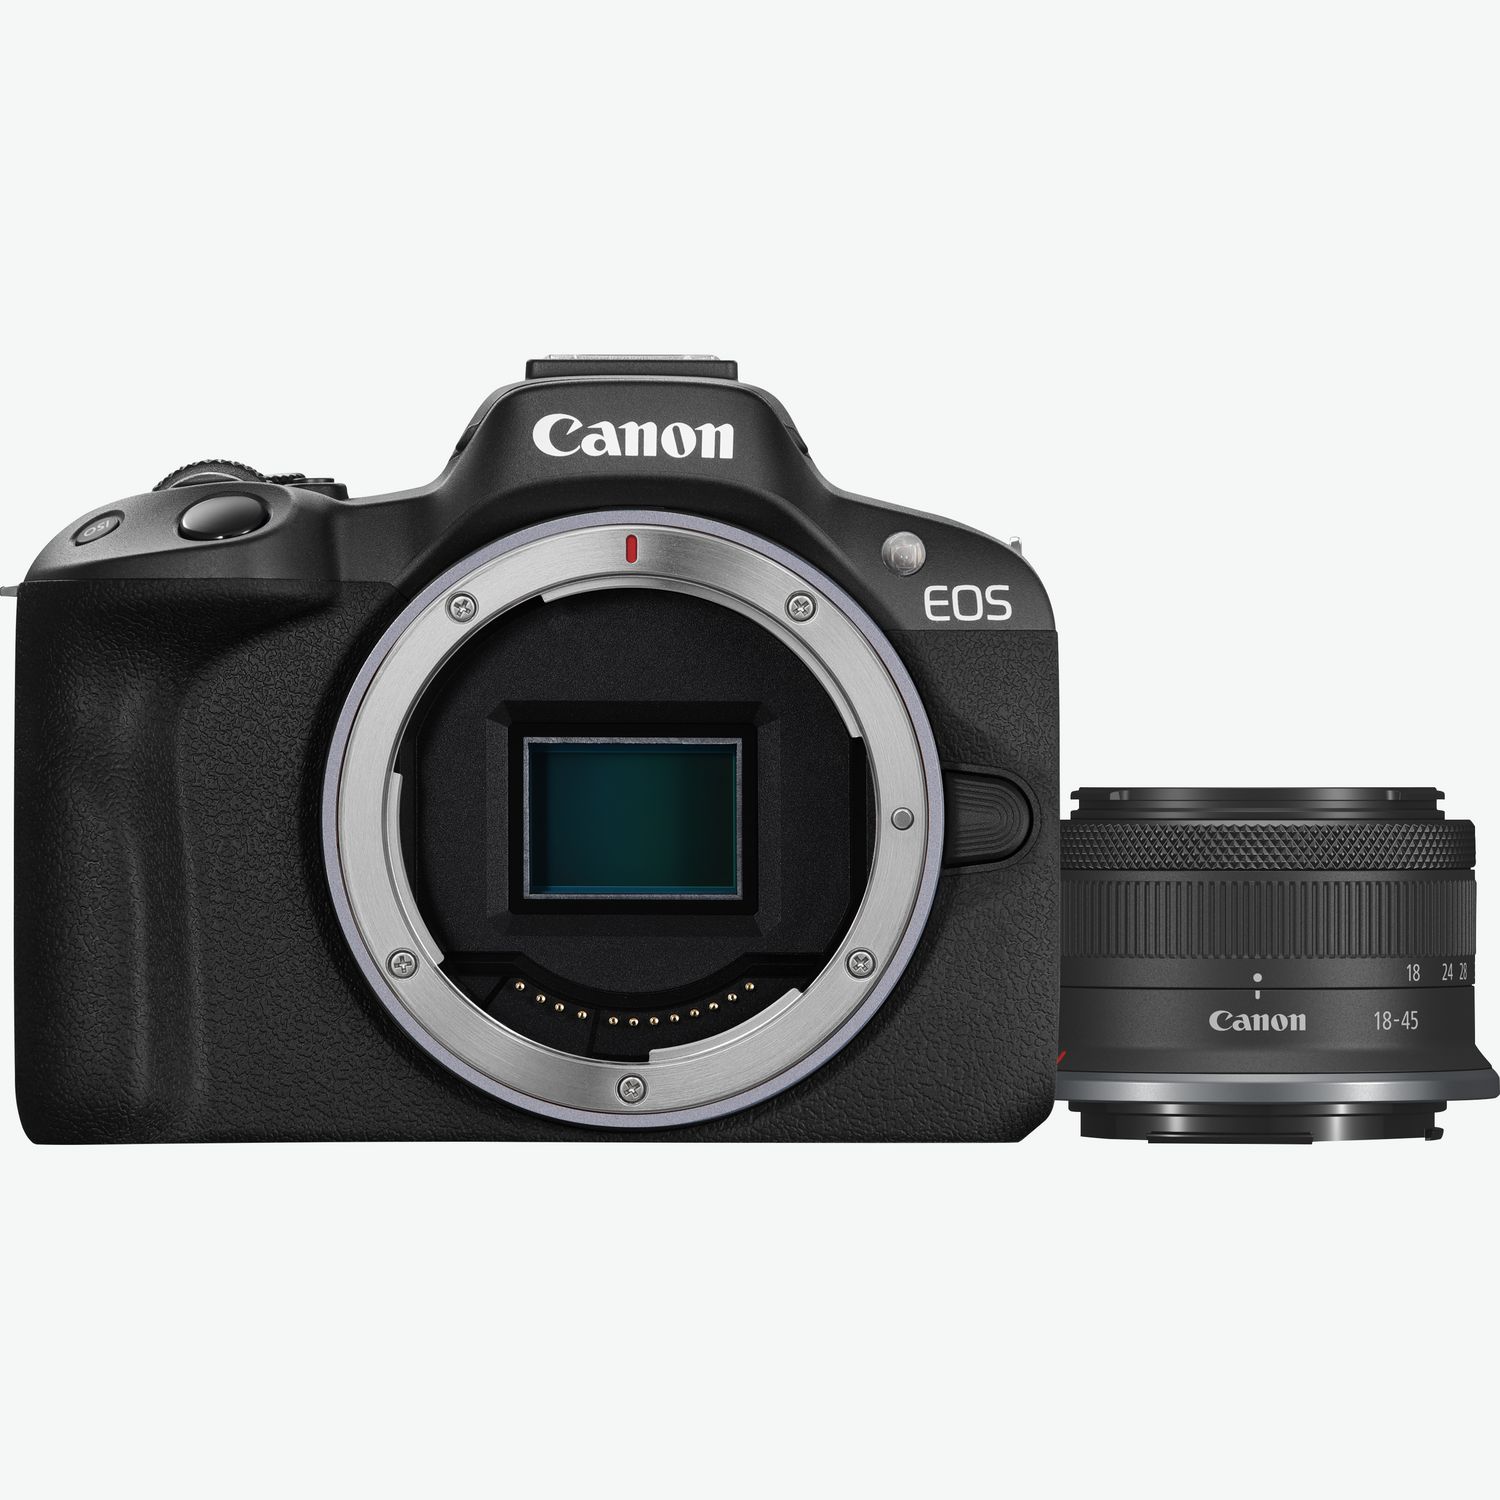 Rent Canon EOS M50 Mark II + EOS-M 15-45mm - kit from €23.90 per month